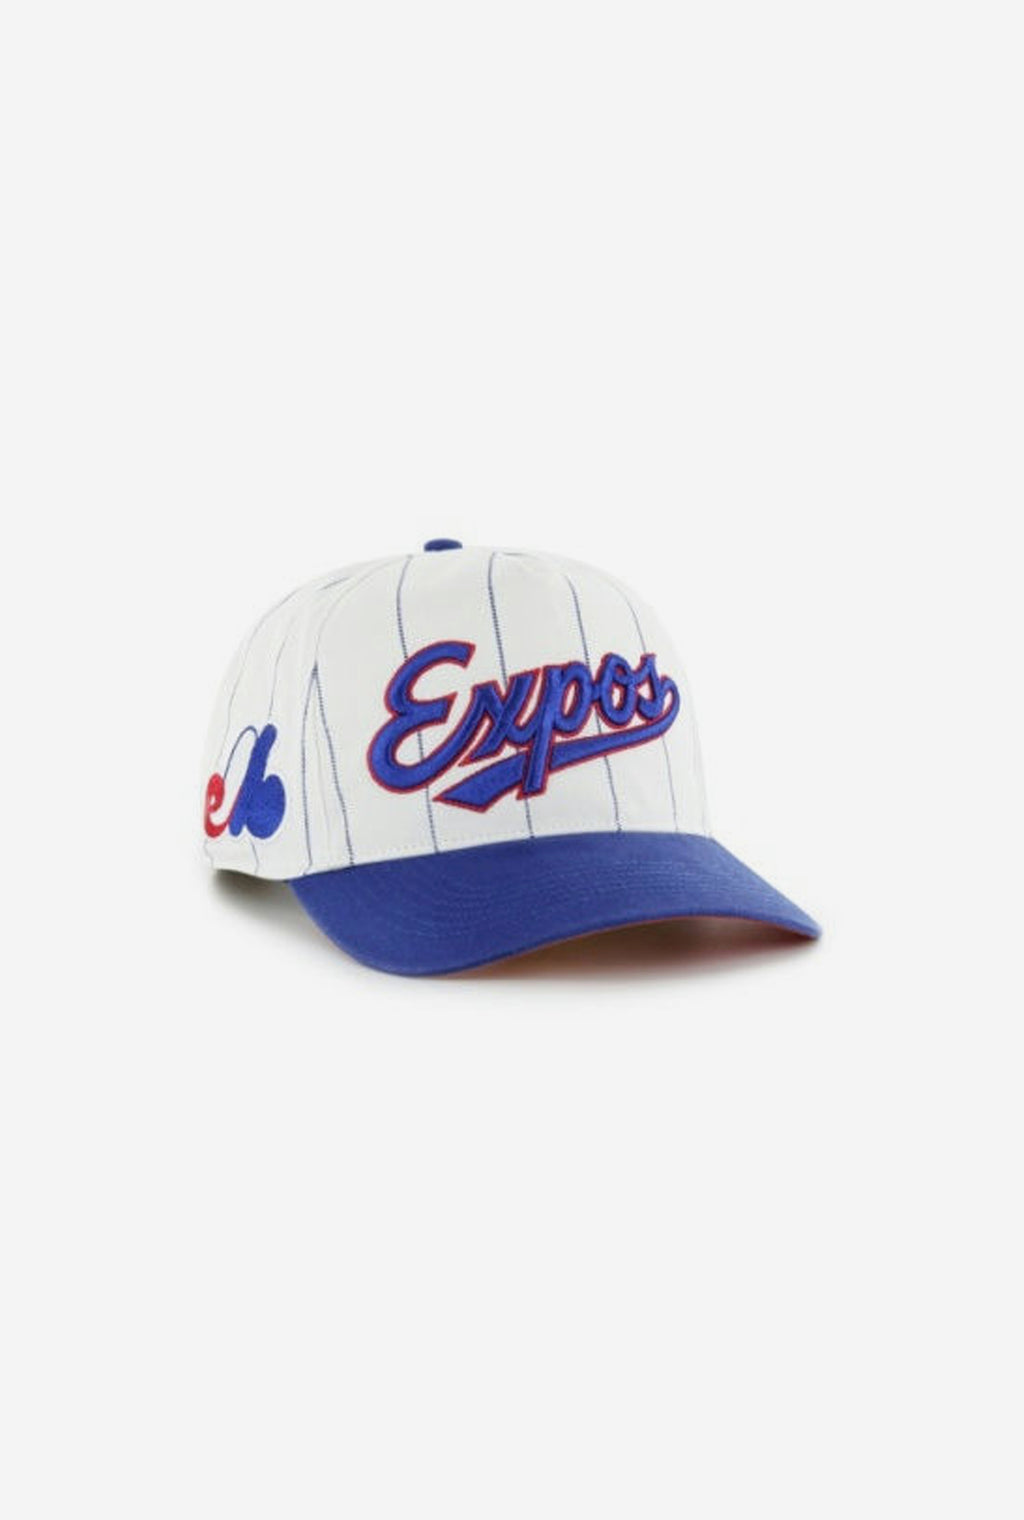 Men's '47 Montreal Expos Cooperstown Collection Double Header White  Pinstripe Hitch Adjustable Cap